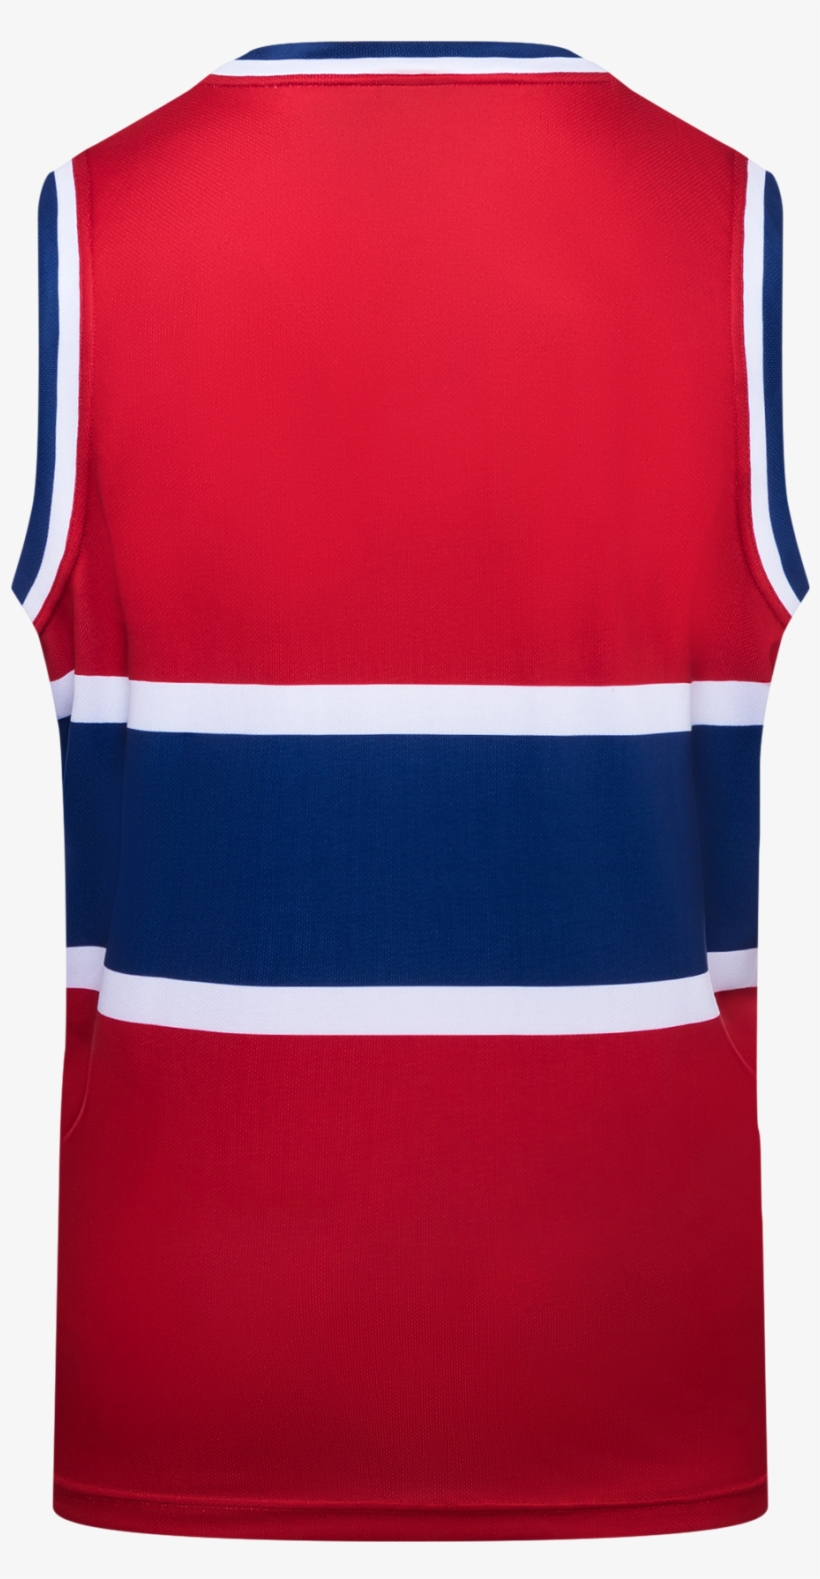 Montreal Canadiens Hockey Tank - Sweater Vest, transparent png #7772215